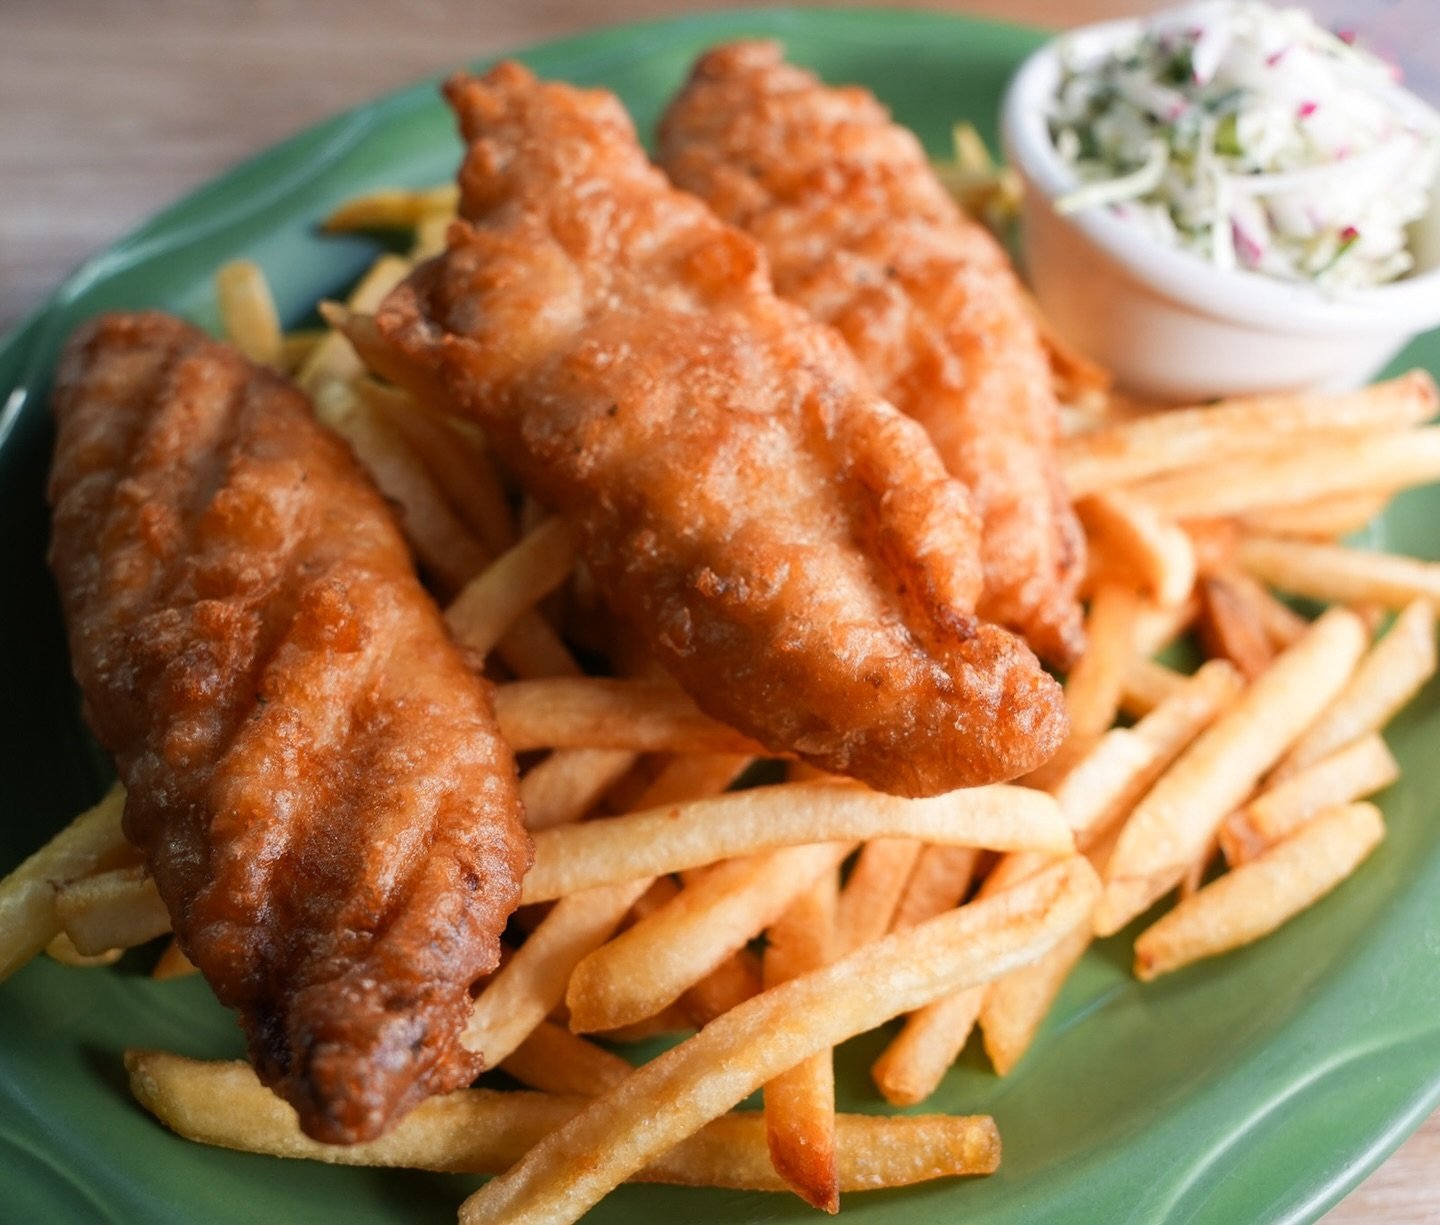 Craving something crispy and delicious? Swing by and grab our fish and chips.

#gardena #southbay #fishandchips #delicious